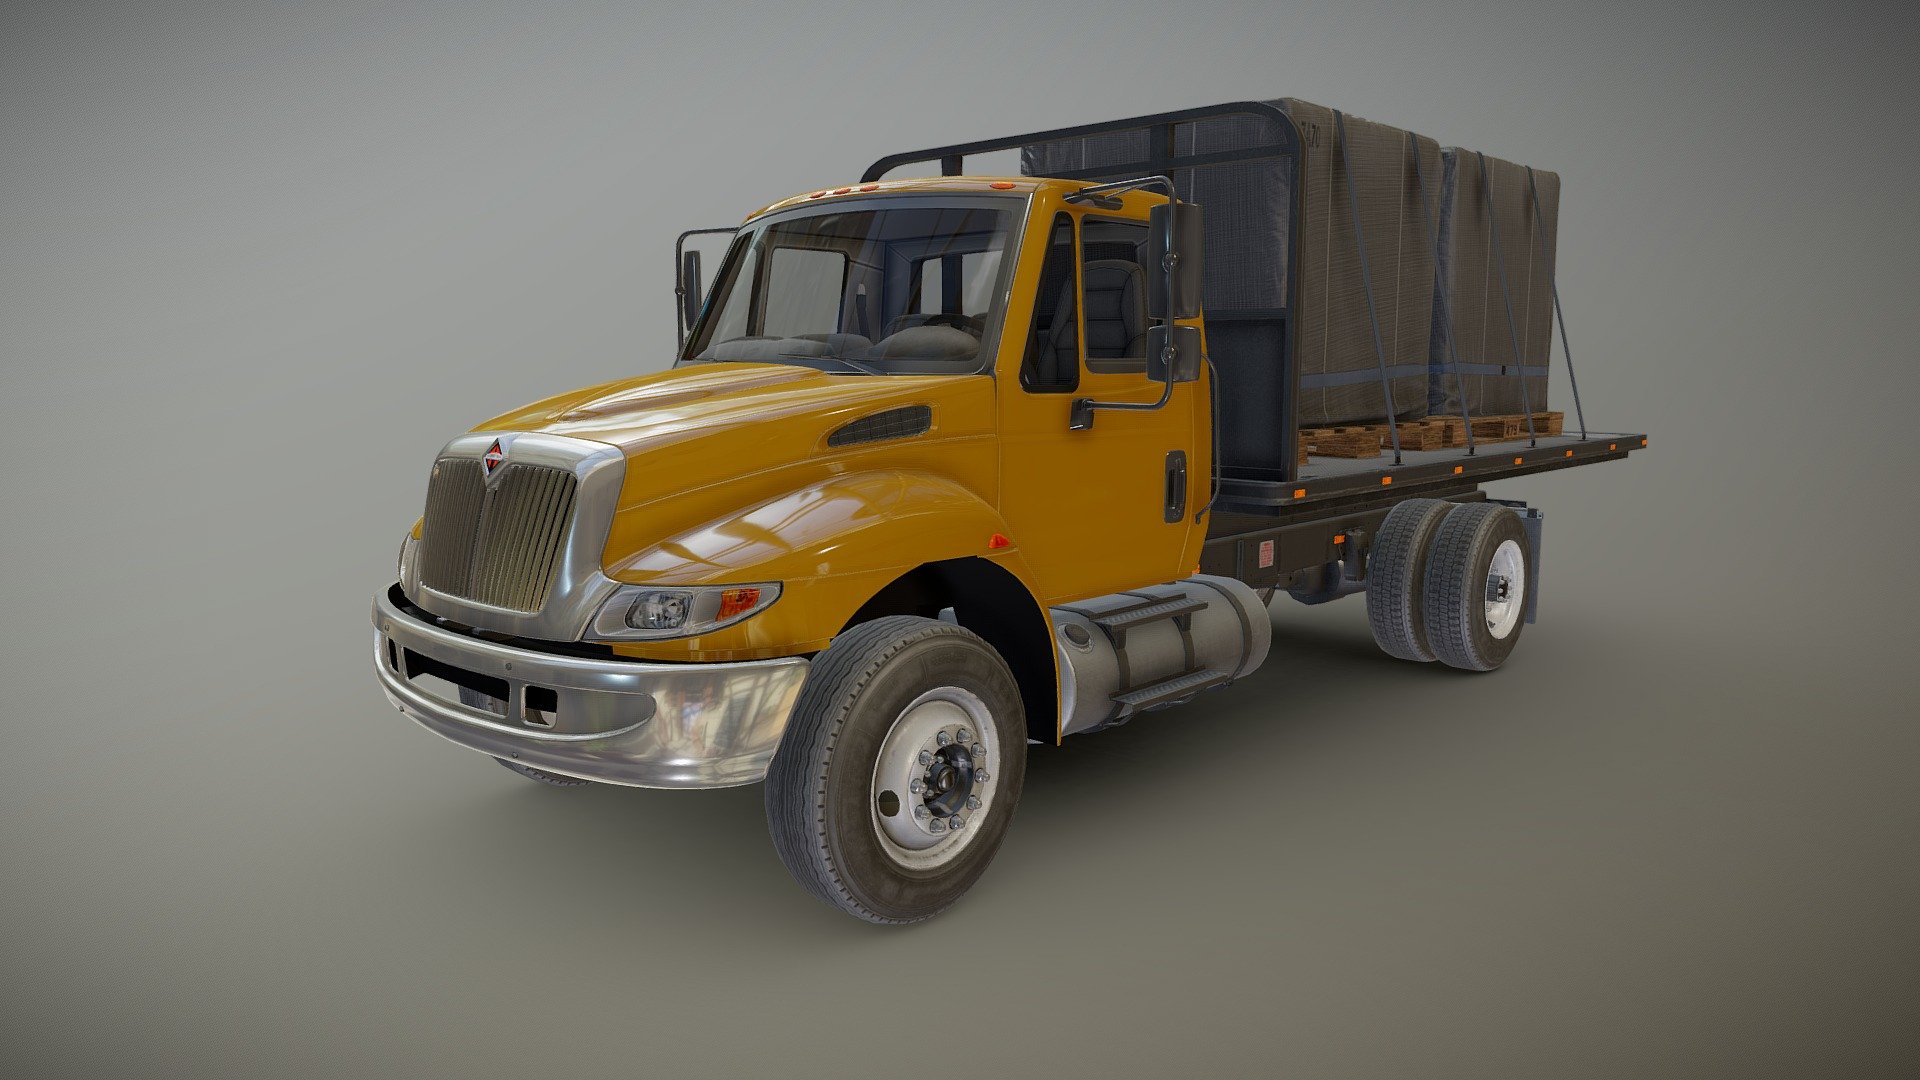 International Durastar flatbed truck game ready model.

Full textured model with clean topology.

High accuracy exterior model.

Different tires for rear and front wheels.

High detailed cabin - seams, chrome parts, wipers, mud flaps and etc.

High detailed rear suspension with axles and other parts.

Two textures for interior - black and brown.

Lowpoly interior - 3039 tris 1804 verts

Wheels - 10254 tris 6132 verts

Full model - 60499 tris 34990 verts.

High detailed rims and tires, with PBR maps(Base_Color/Metallic/Normal/Roughness.png2048x2048 )

Model ready for real-time apps, games, virtual reality and augmented reality.

Asset looks accuracy and realistic and become a good part of your project 3d model